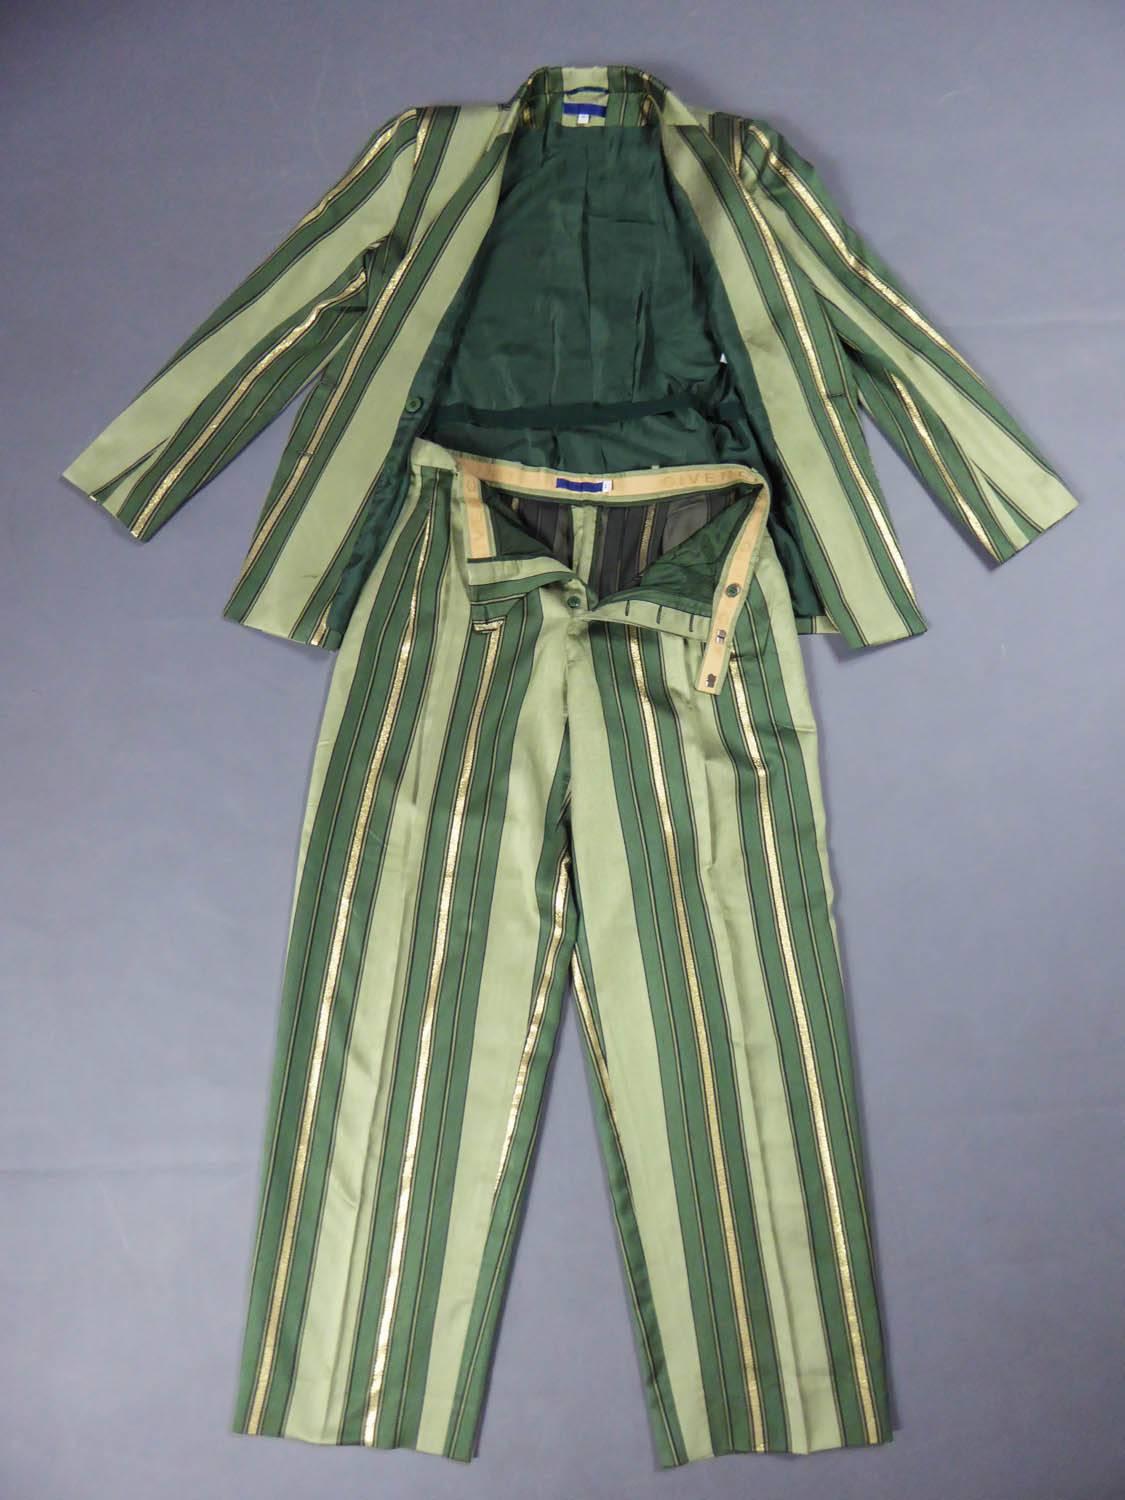 Circa 1990

France

Pantsuit Givenchy in silk and lurex from the early 90s. Wide stripes in gradiation from light green to dark green, underlined with silver lurex bands. Men's wardrobe inspiration from the 30s. Fitted jacket with large lapels and